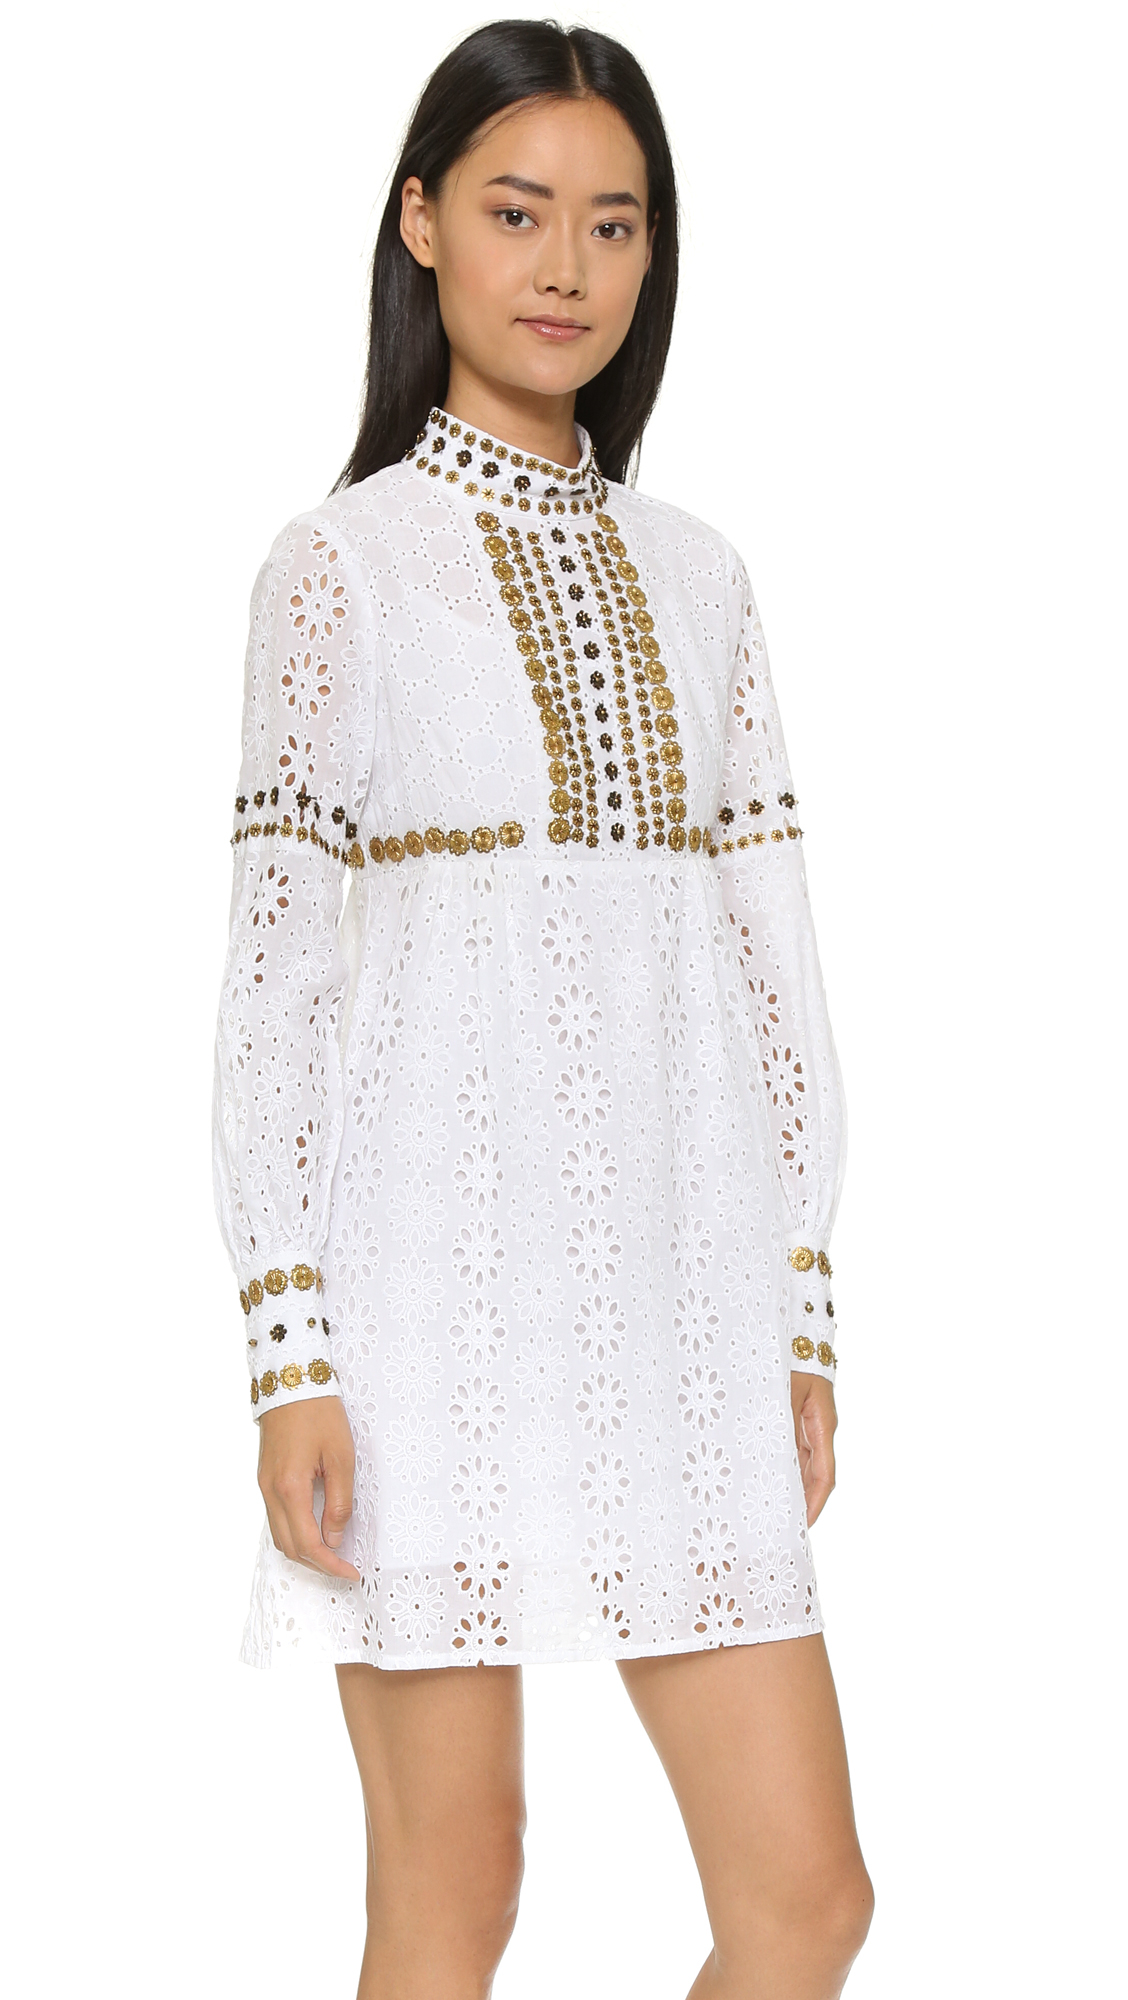 Lyst - Anna Sui Medallion Embroidery Dress - Ivory Multi in White1128 x 2000